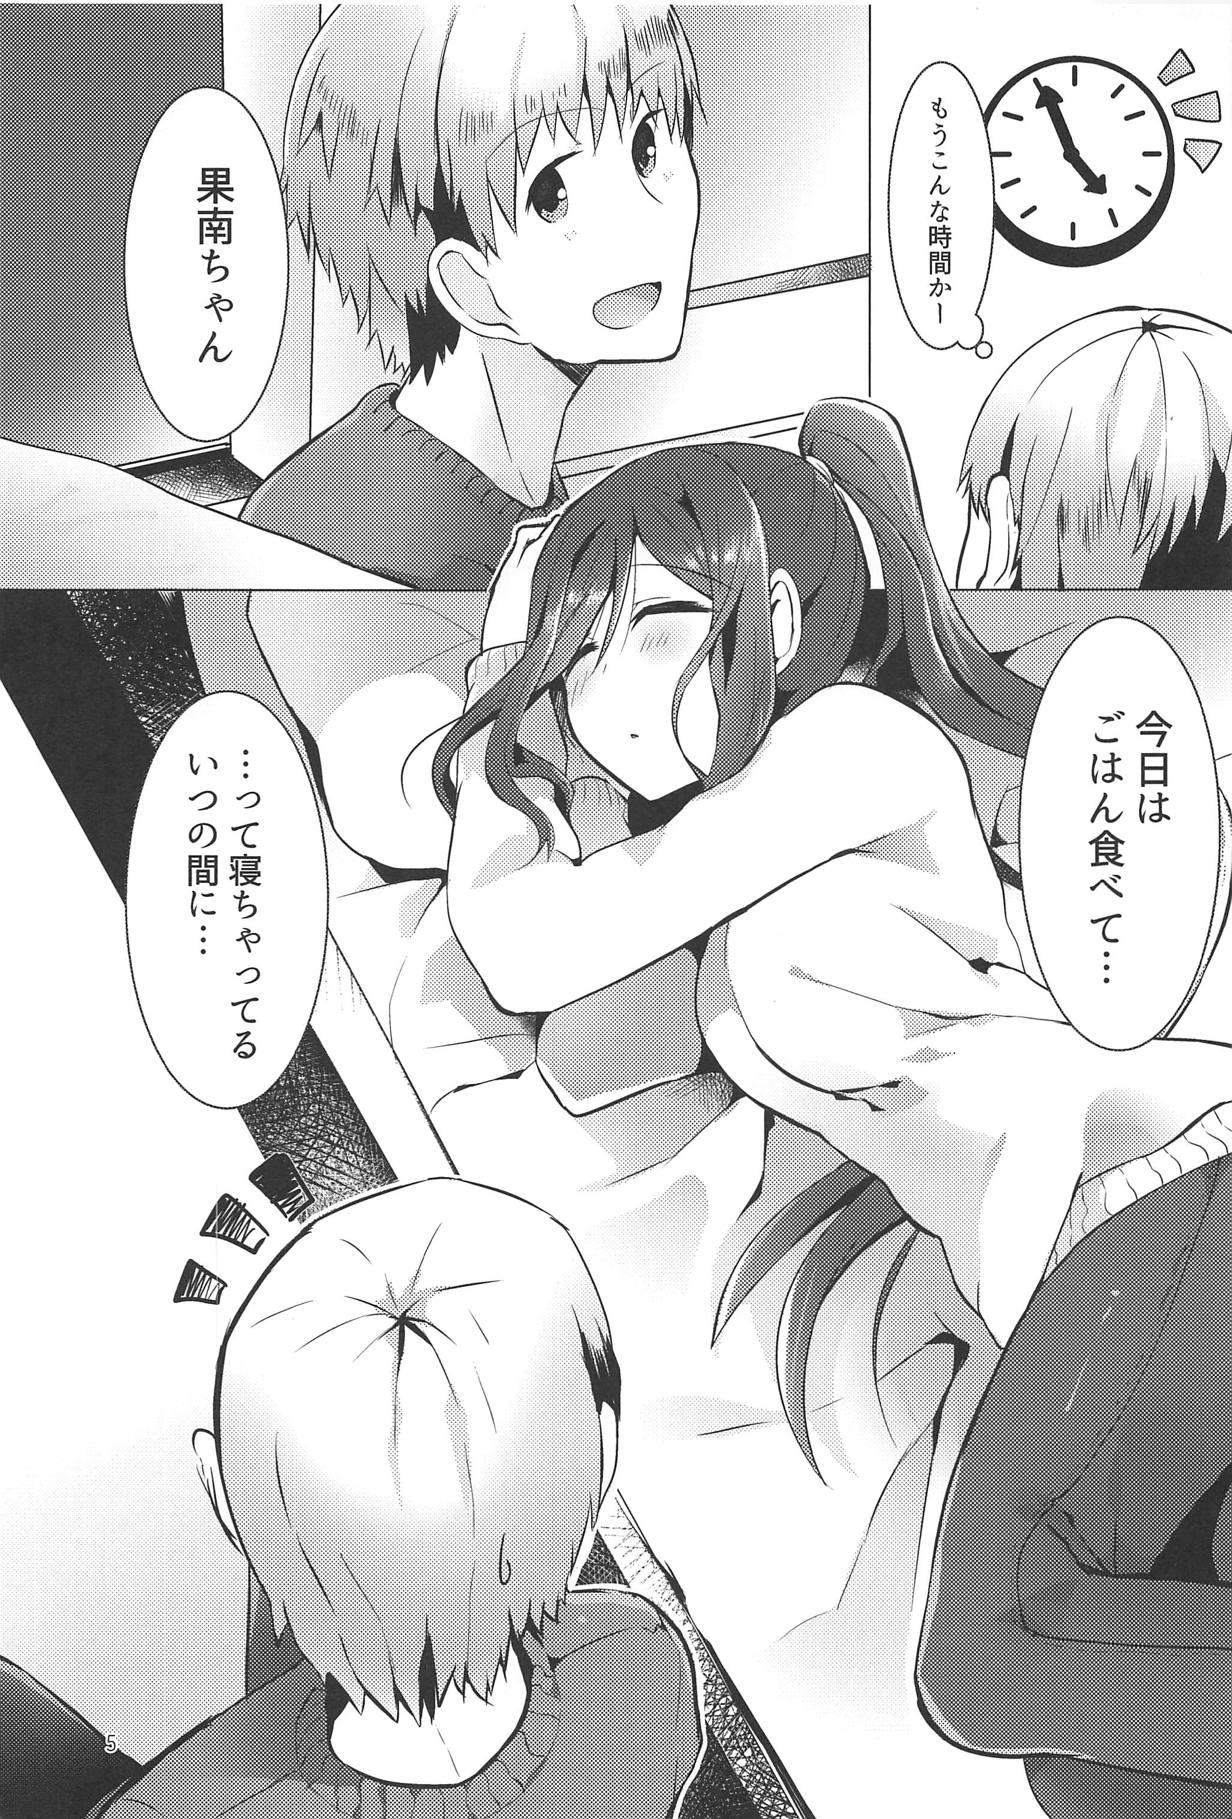 Titties Kanan-chan to 4 - Love live sunshine Tight Cunt - Page 4